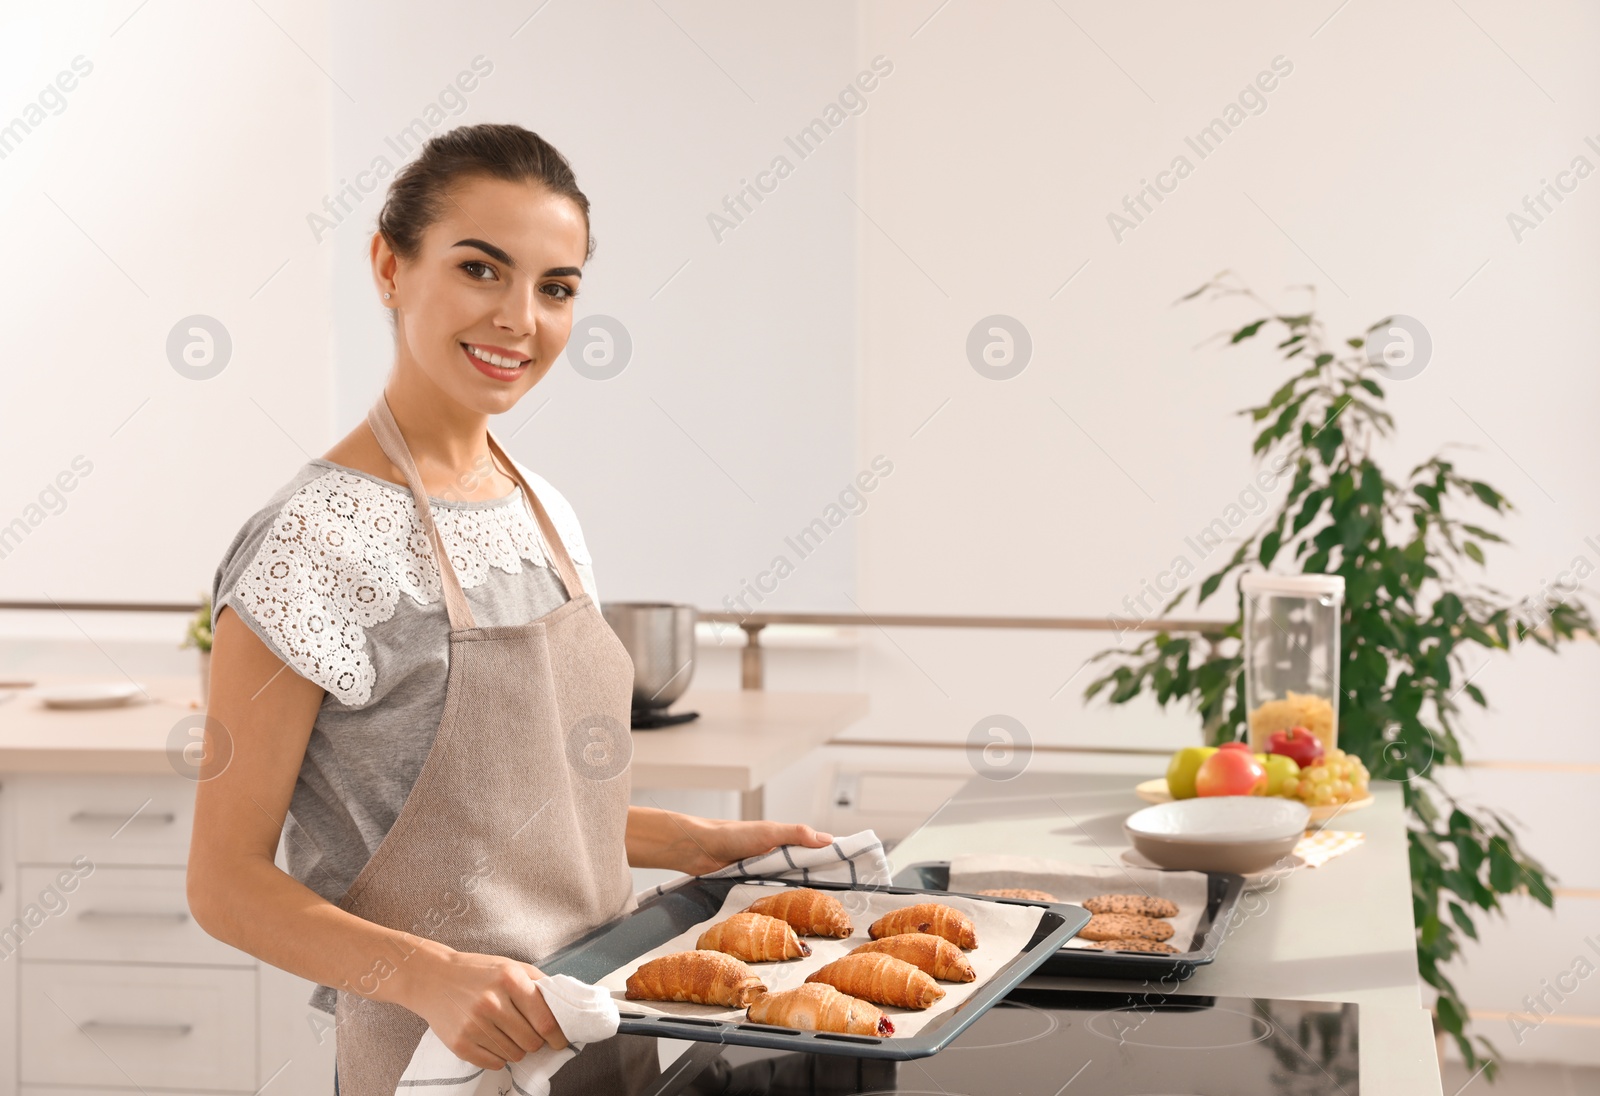 Photo of Young woman holding oven sheet with homemade croissants in kitchen